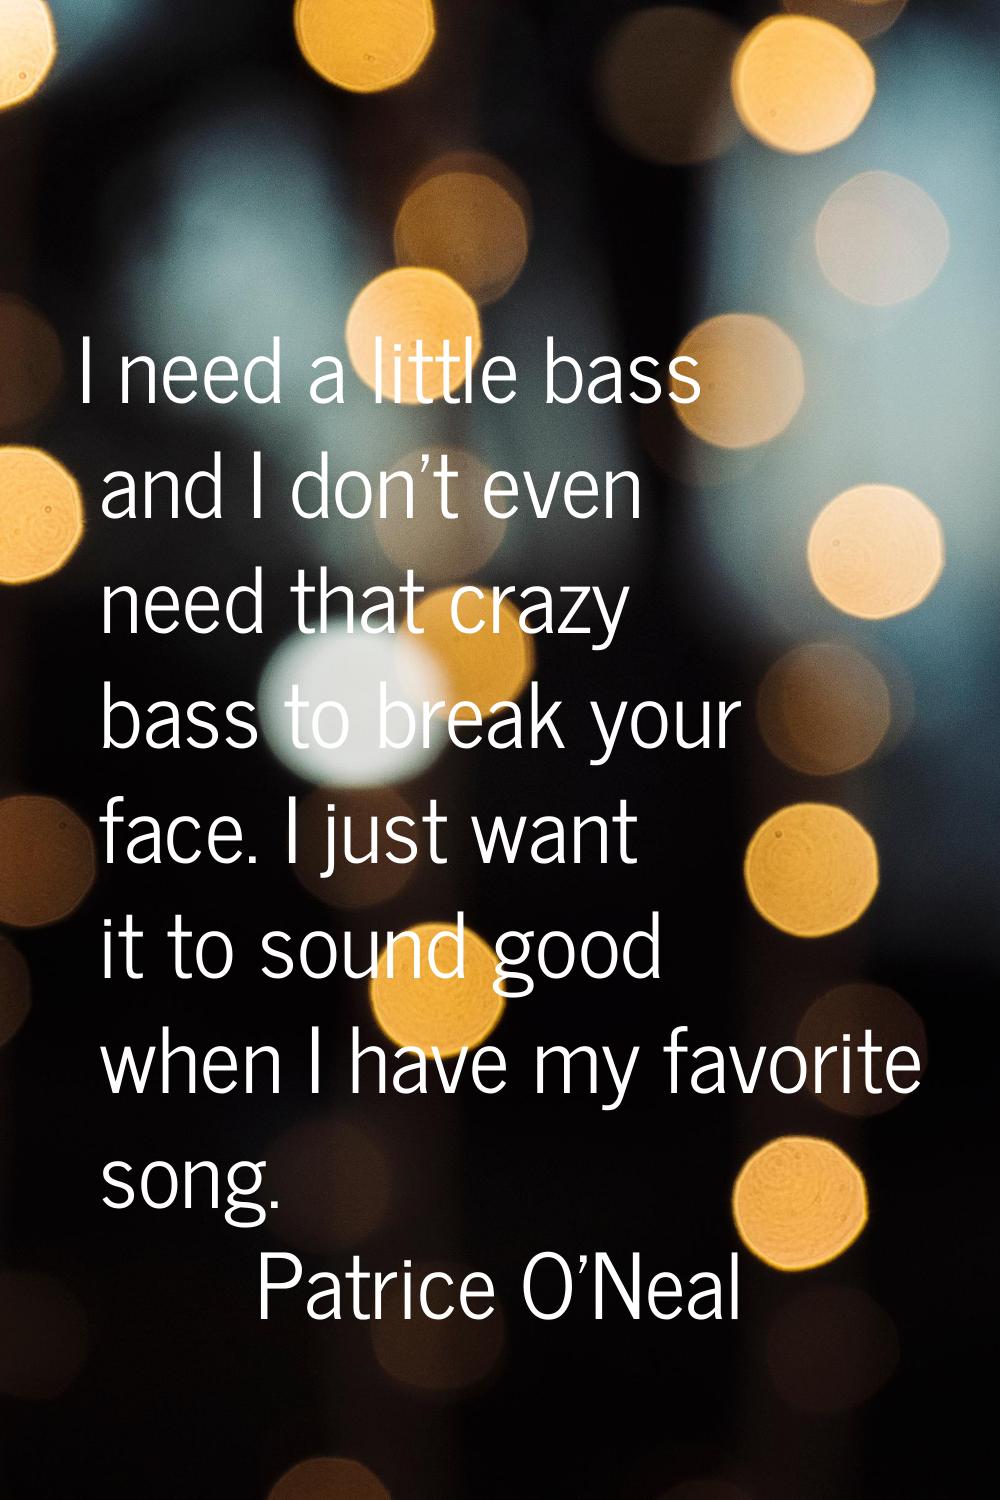 I need a little bass and I don't even need that crazy bass to break your face. I just want it to so